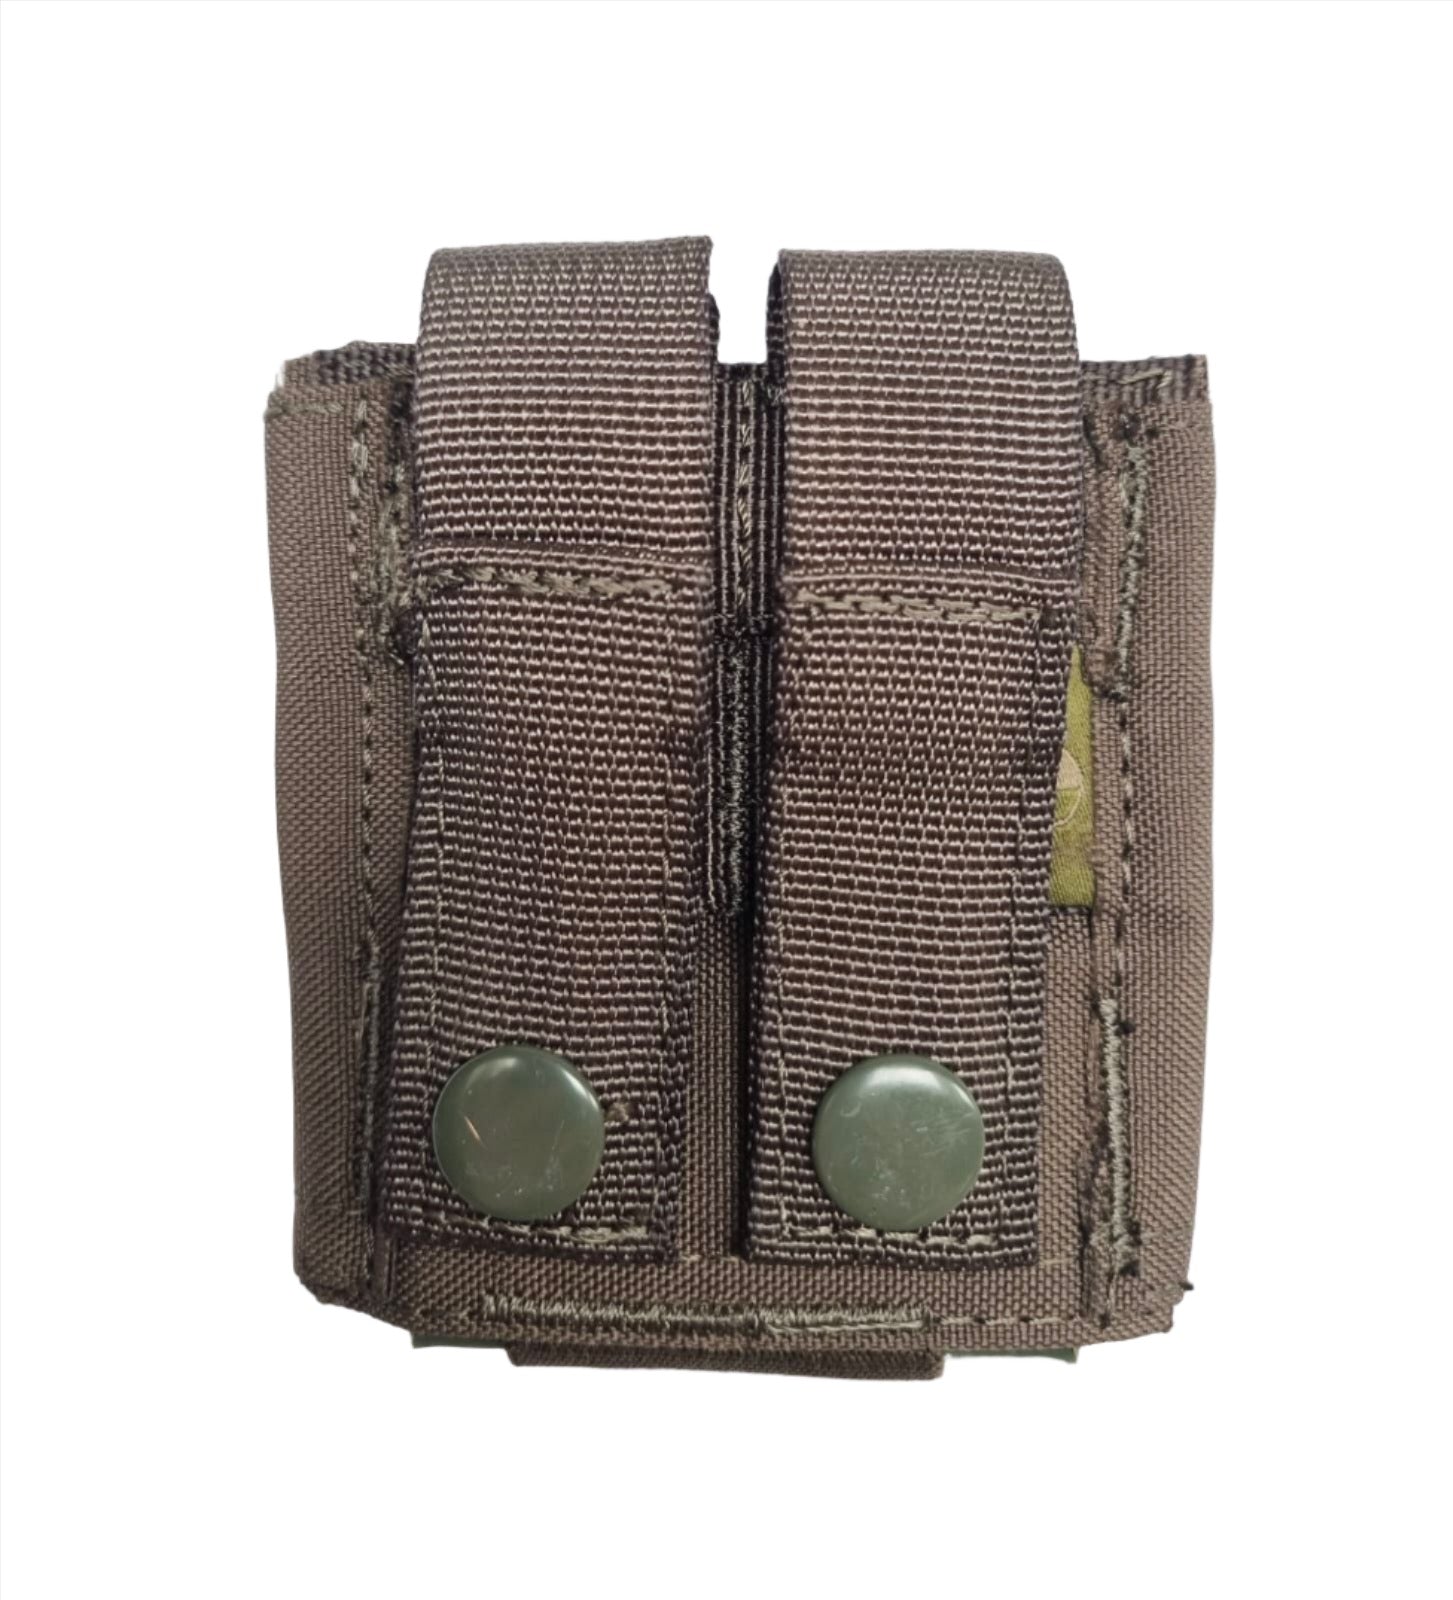 SHE-23031 GRIPTAC SINGLE M4/M16 MAG POUCH ARMY GREEN